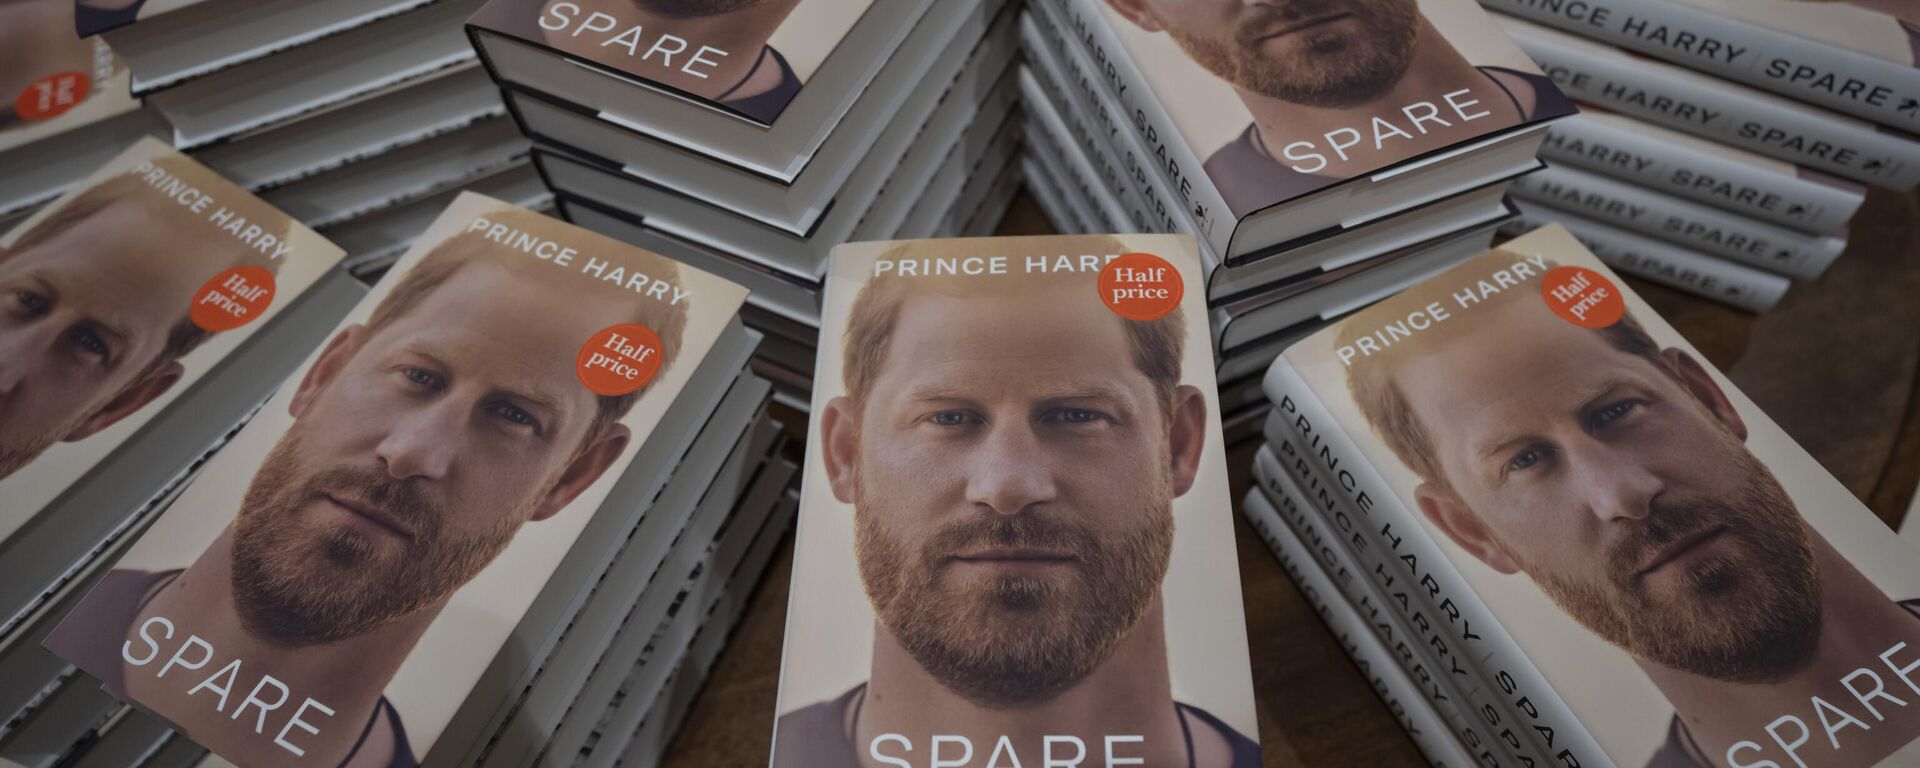 FILE - Copies of the new book by Prince Harry called Spare are displayed at a book store in London, Jan. 10, 2023. Prince Harry’s explosive memoir, with its damning allegations of a toxic relationship between the monarchy and the press, is likely to accelerate the pace of change already under way within the House of Windsor following the death of Queen Elizabeth II. - Sputnik International, 1920, 12.01.2023